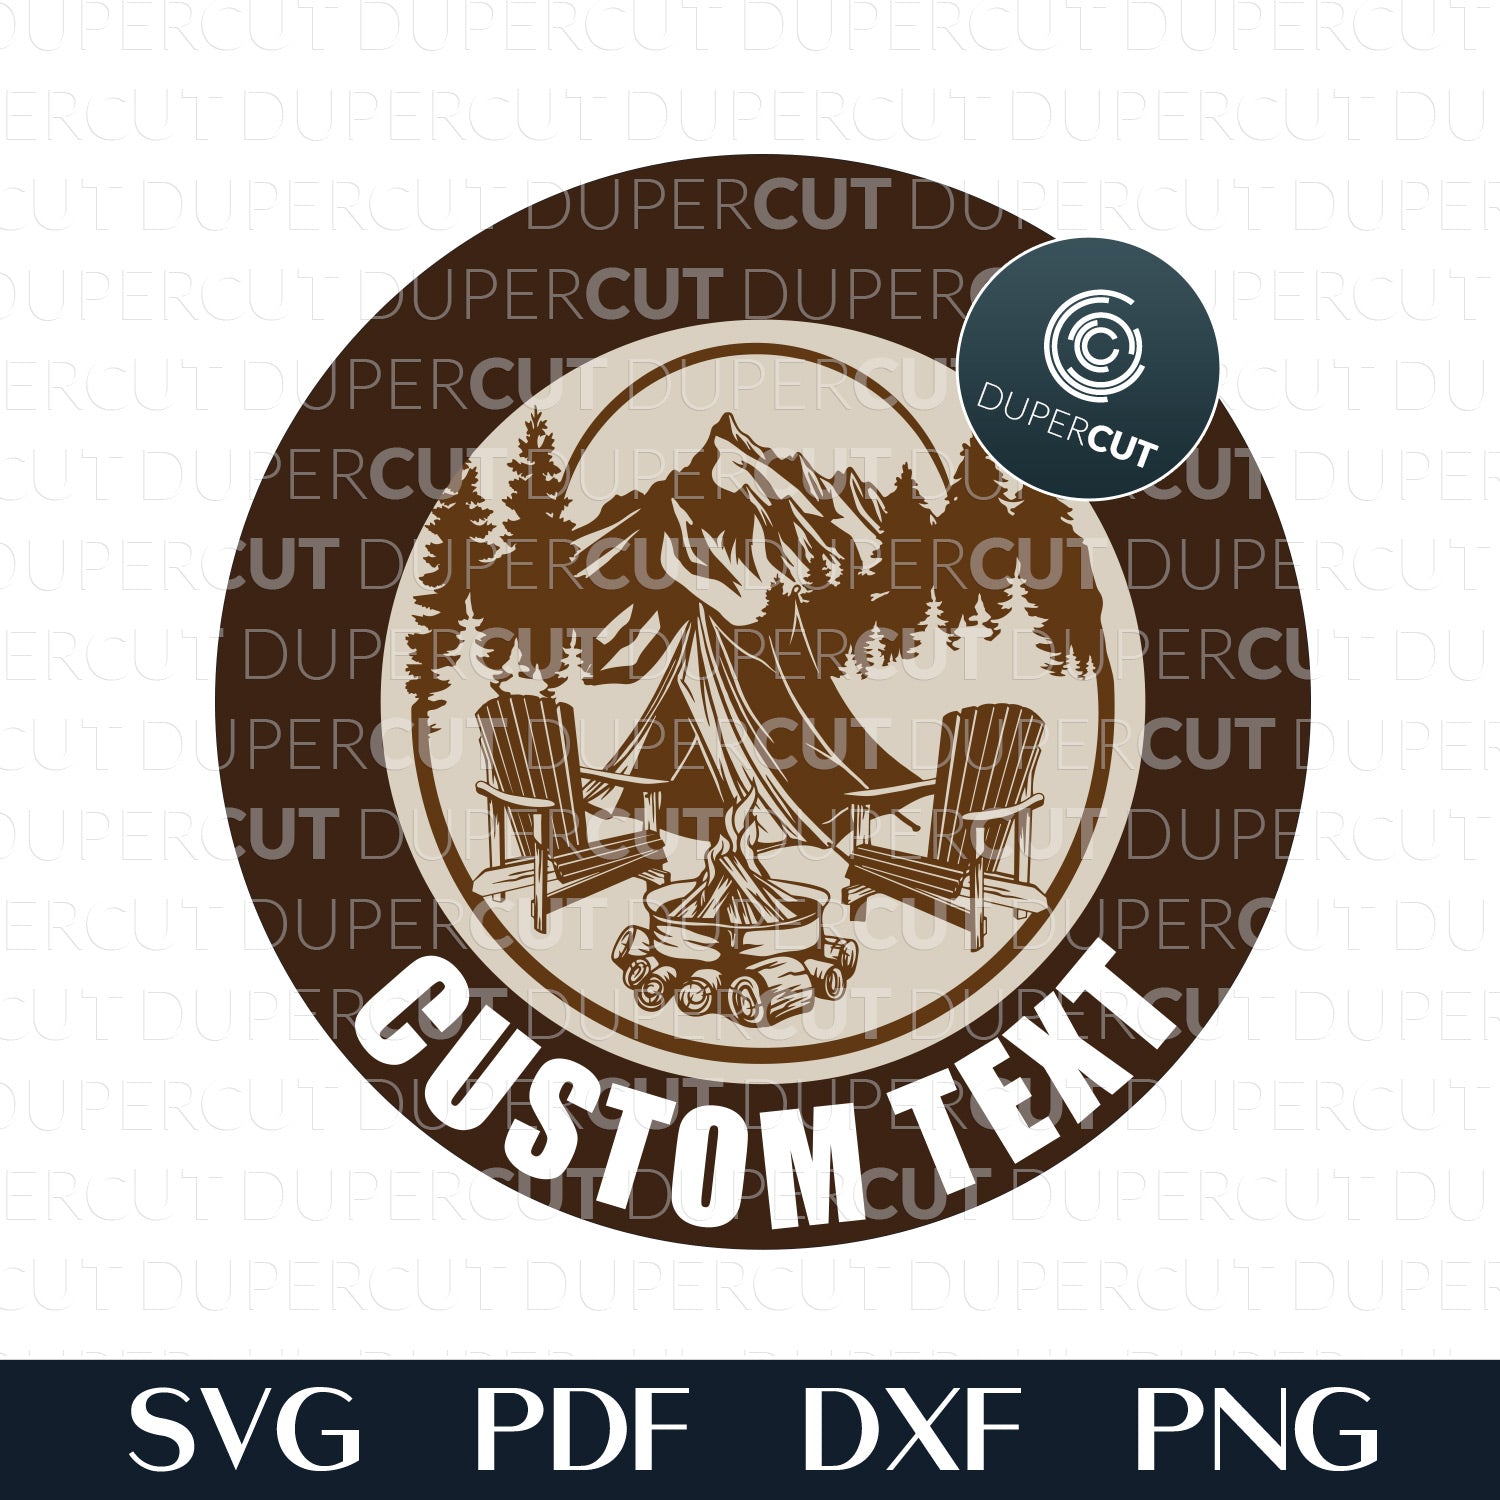 Camping scene personalized adventure sign - SVG DXF layered vector files for Glowforge, X-tool, Cricut, CNC plasma machines by www.DuperCut.com